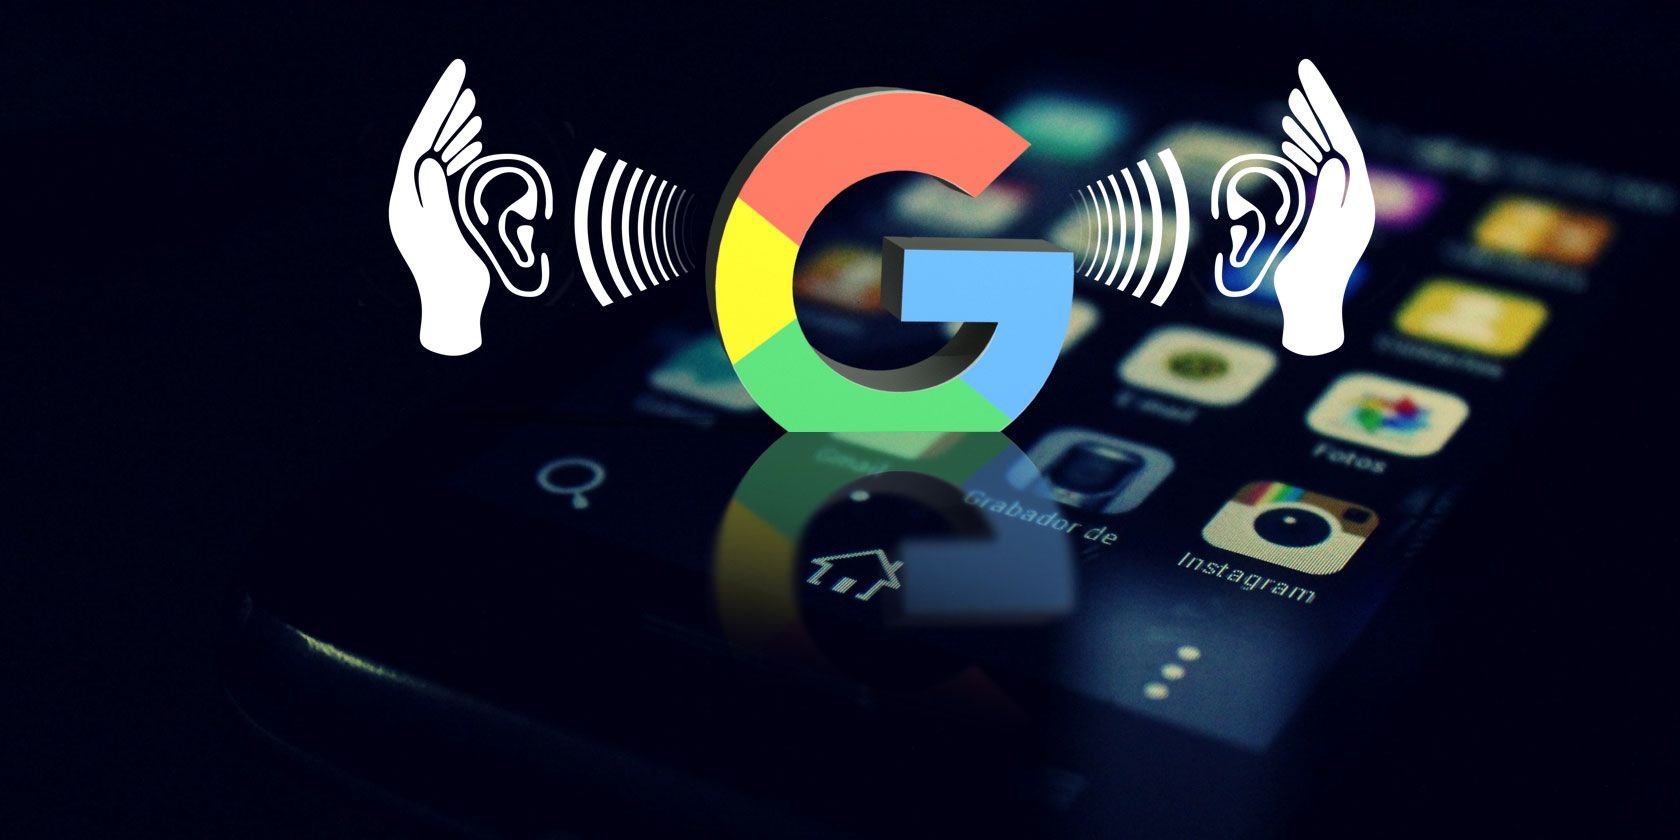 Your Phone Is Secretly Always Recording: How to Stop Google From Listening